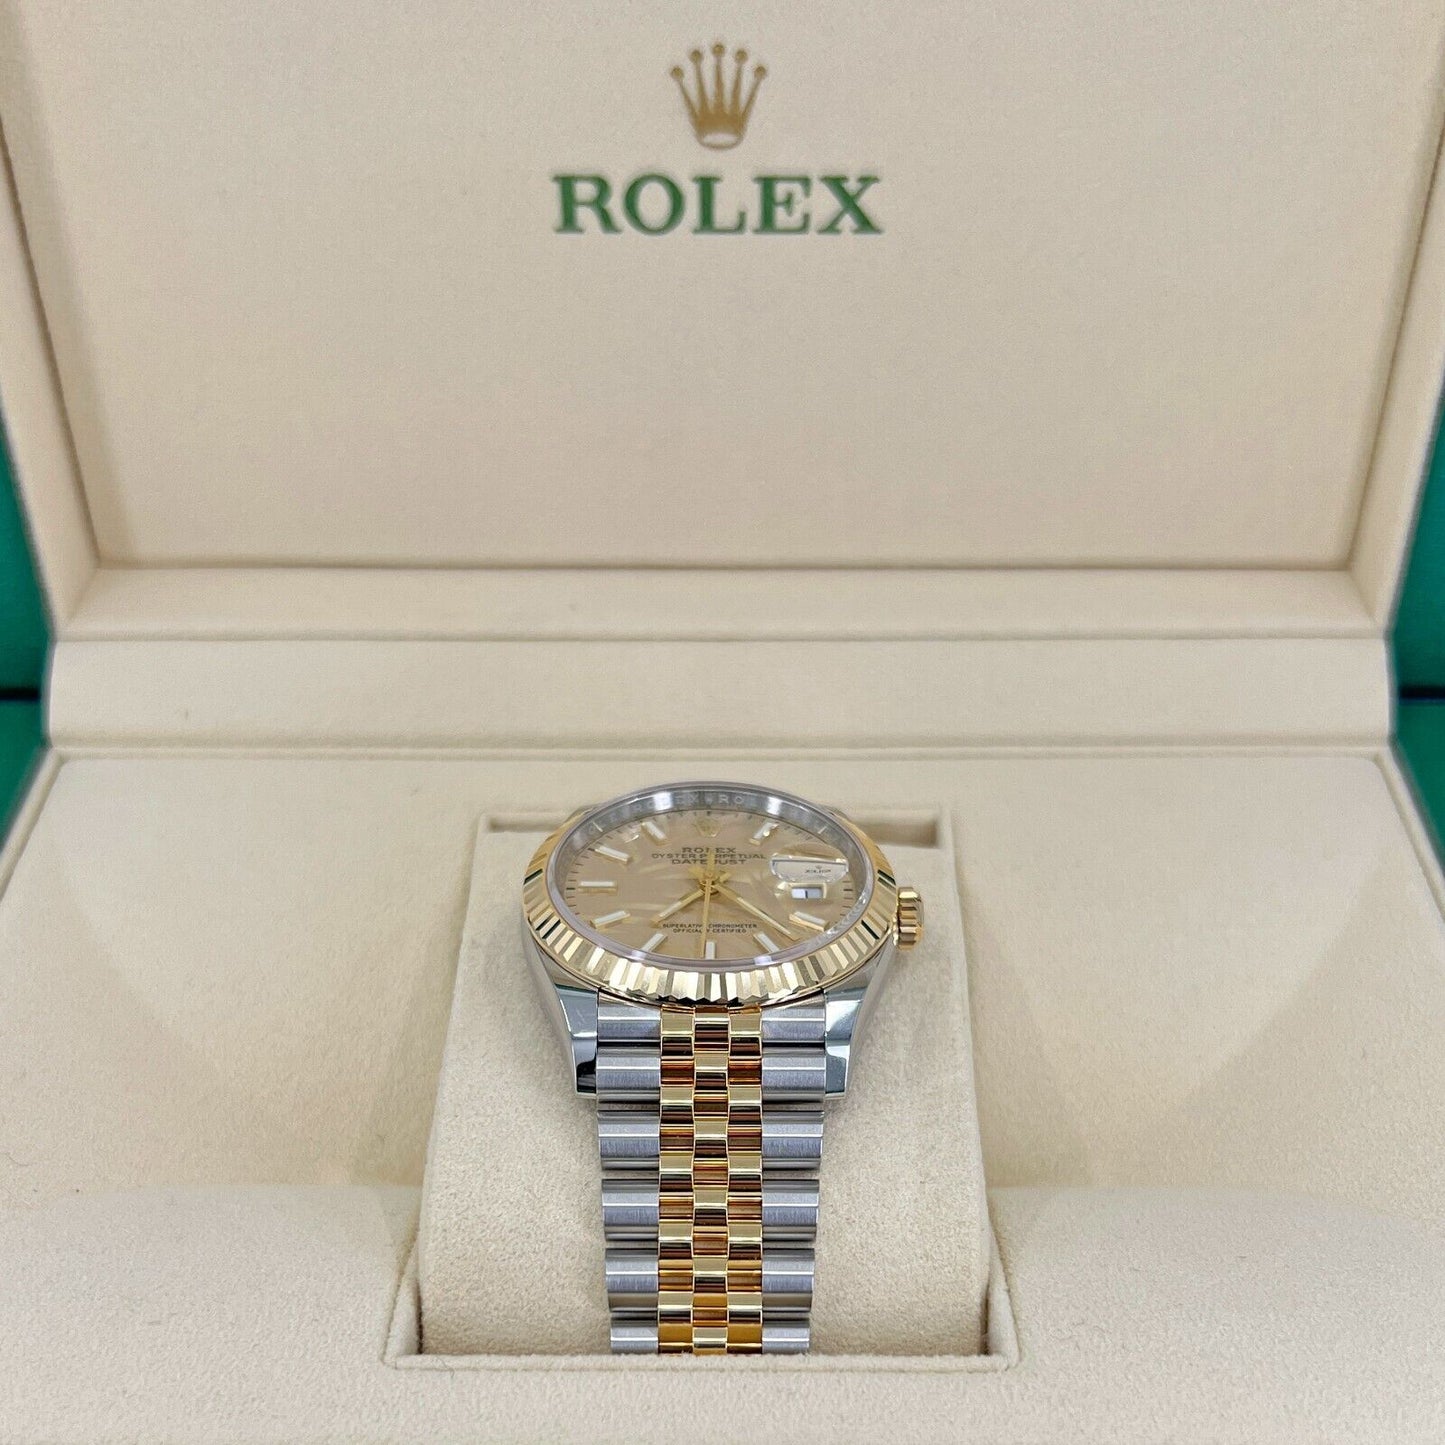 Rolex Datejust 36, 18k Yellow Gold and Stainless Steel, 36mm, Golden, palm motif dial, Ref# 126233-0037, Side